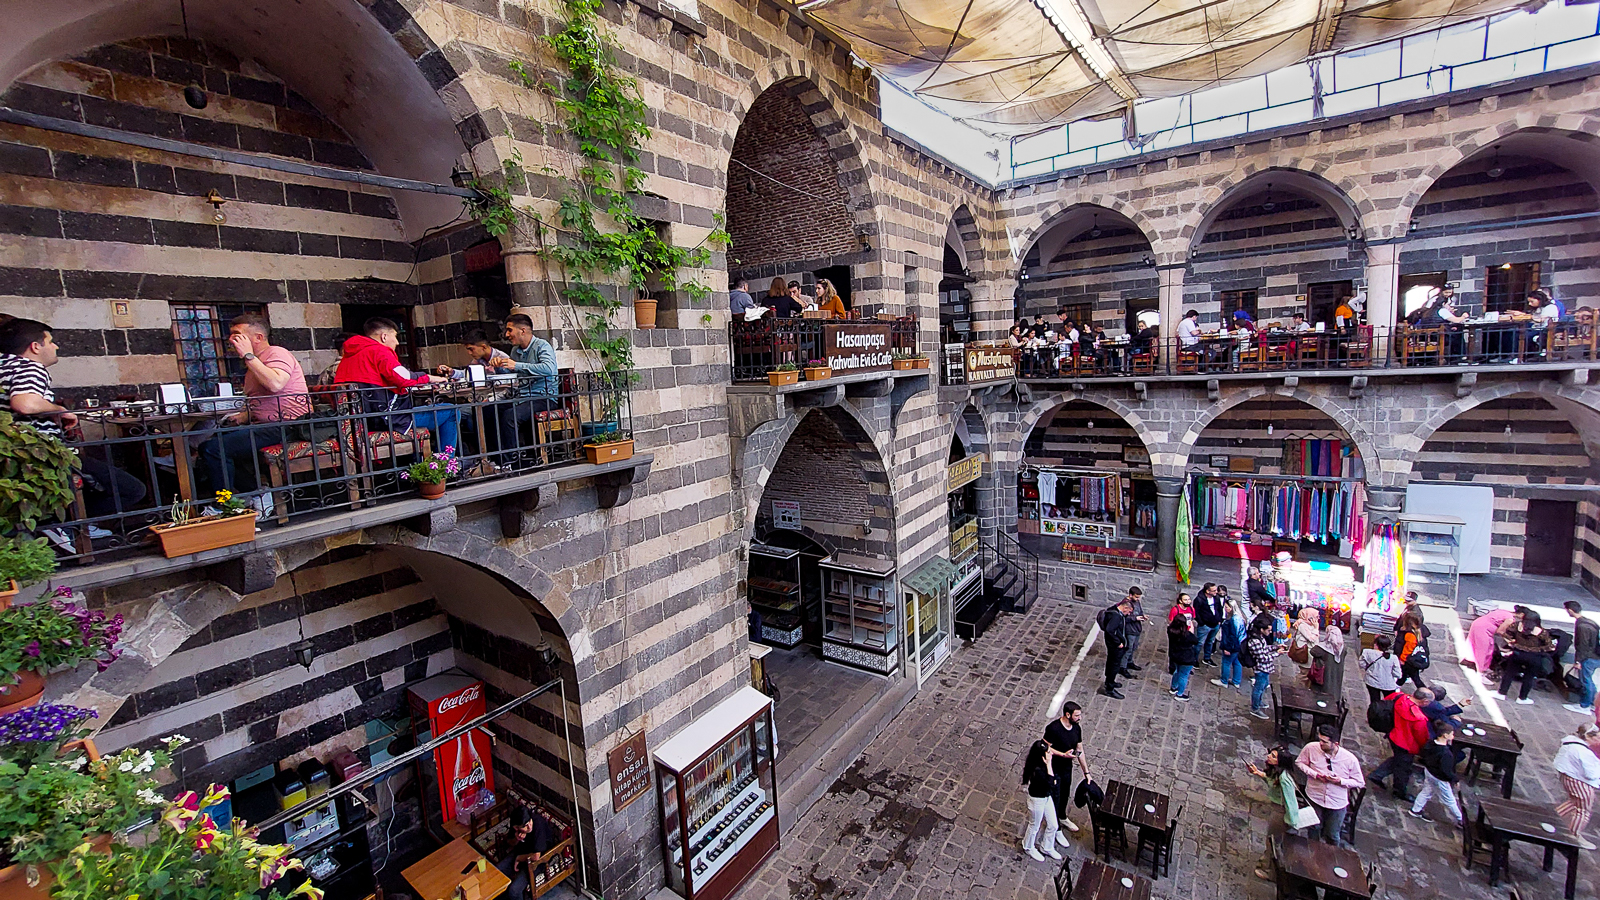 <span  class="uc_style_uc_tiles_grid_image_elementor_uc_items_attribute_title" style="color:#ffffff;">Diyarbakir, downtown, great place for tea and breakfast</span>